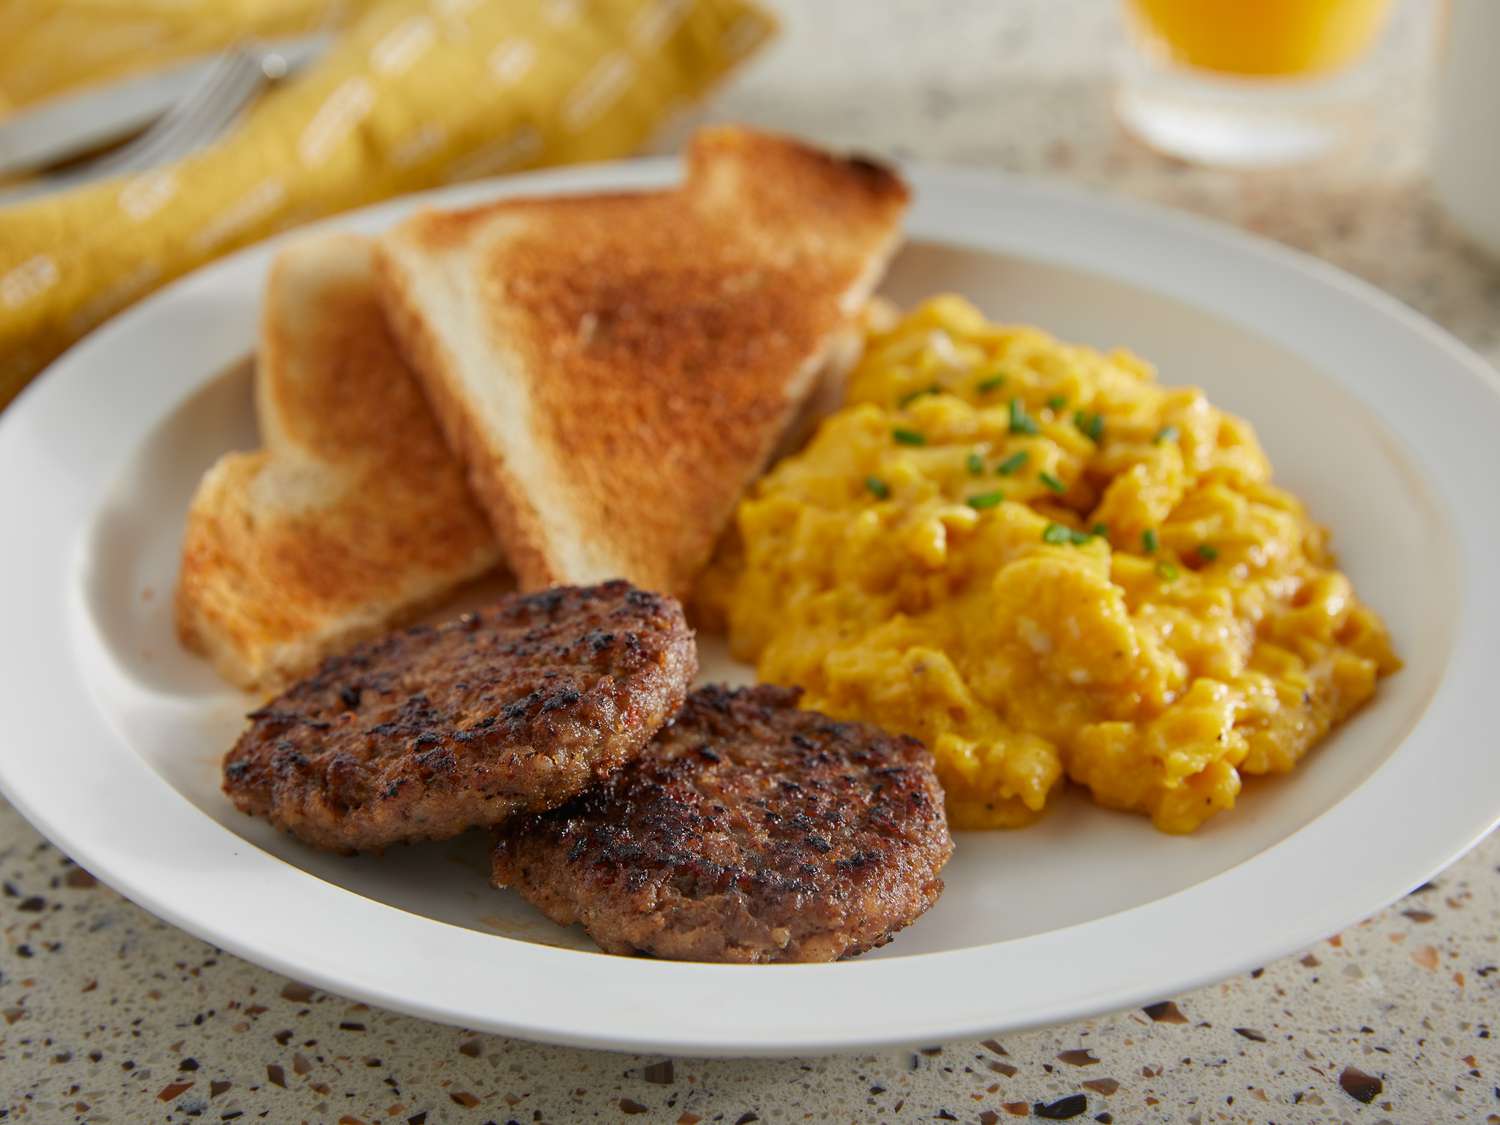 How To Cook Pork Breakfast Sausage - Recipes.net